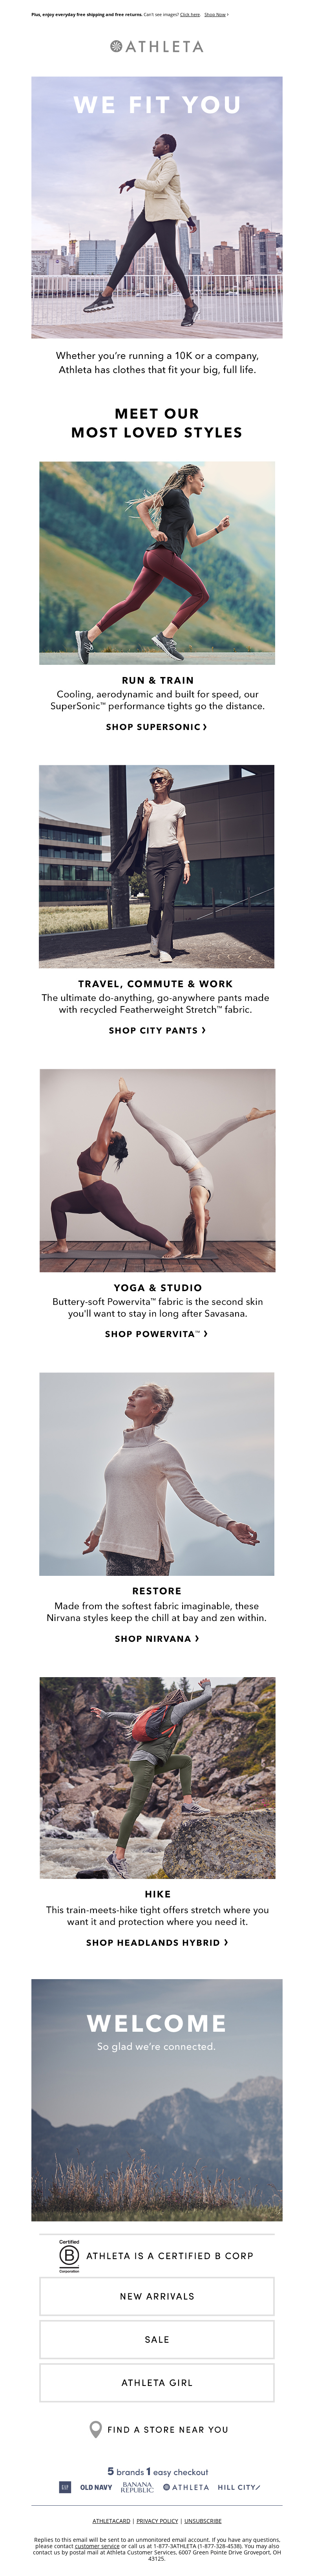 Athleta - Finding the perfect style is easier than ever